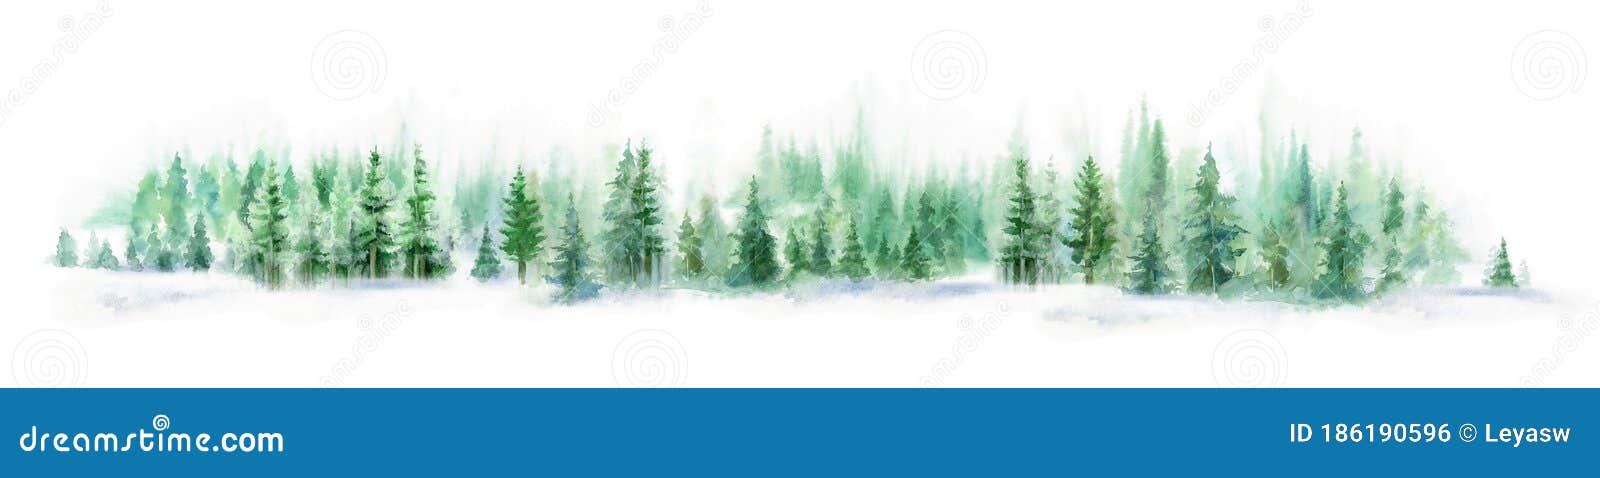 watercolor forest landscape panorama. misty blue fir forest. wild nature, frozen, misty, taiga. abstract long horizontal